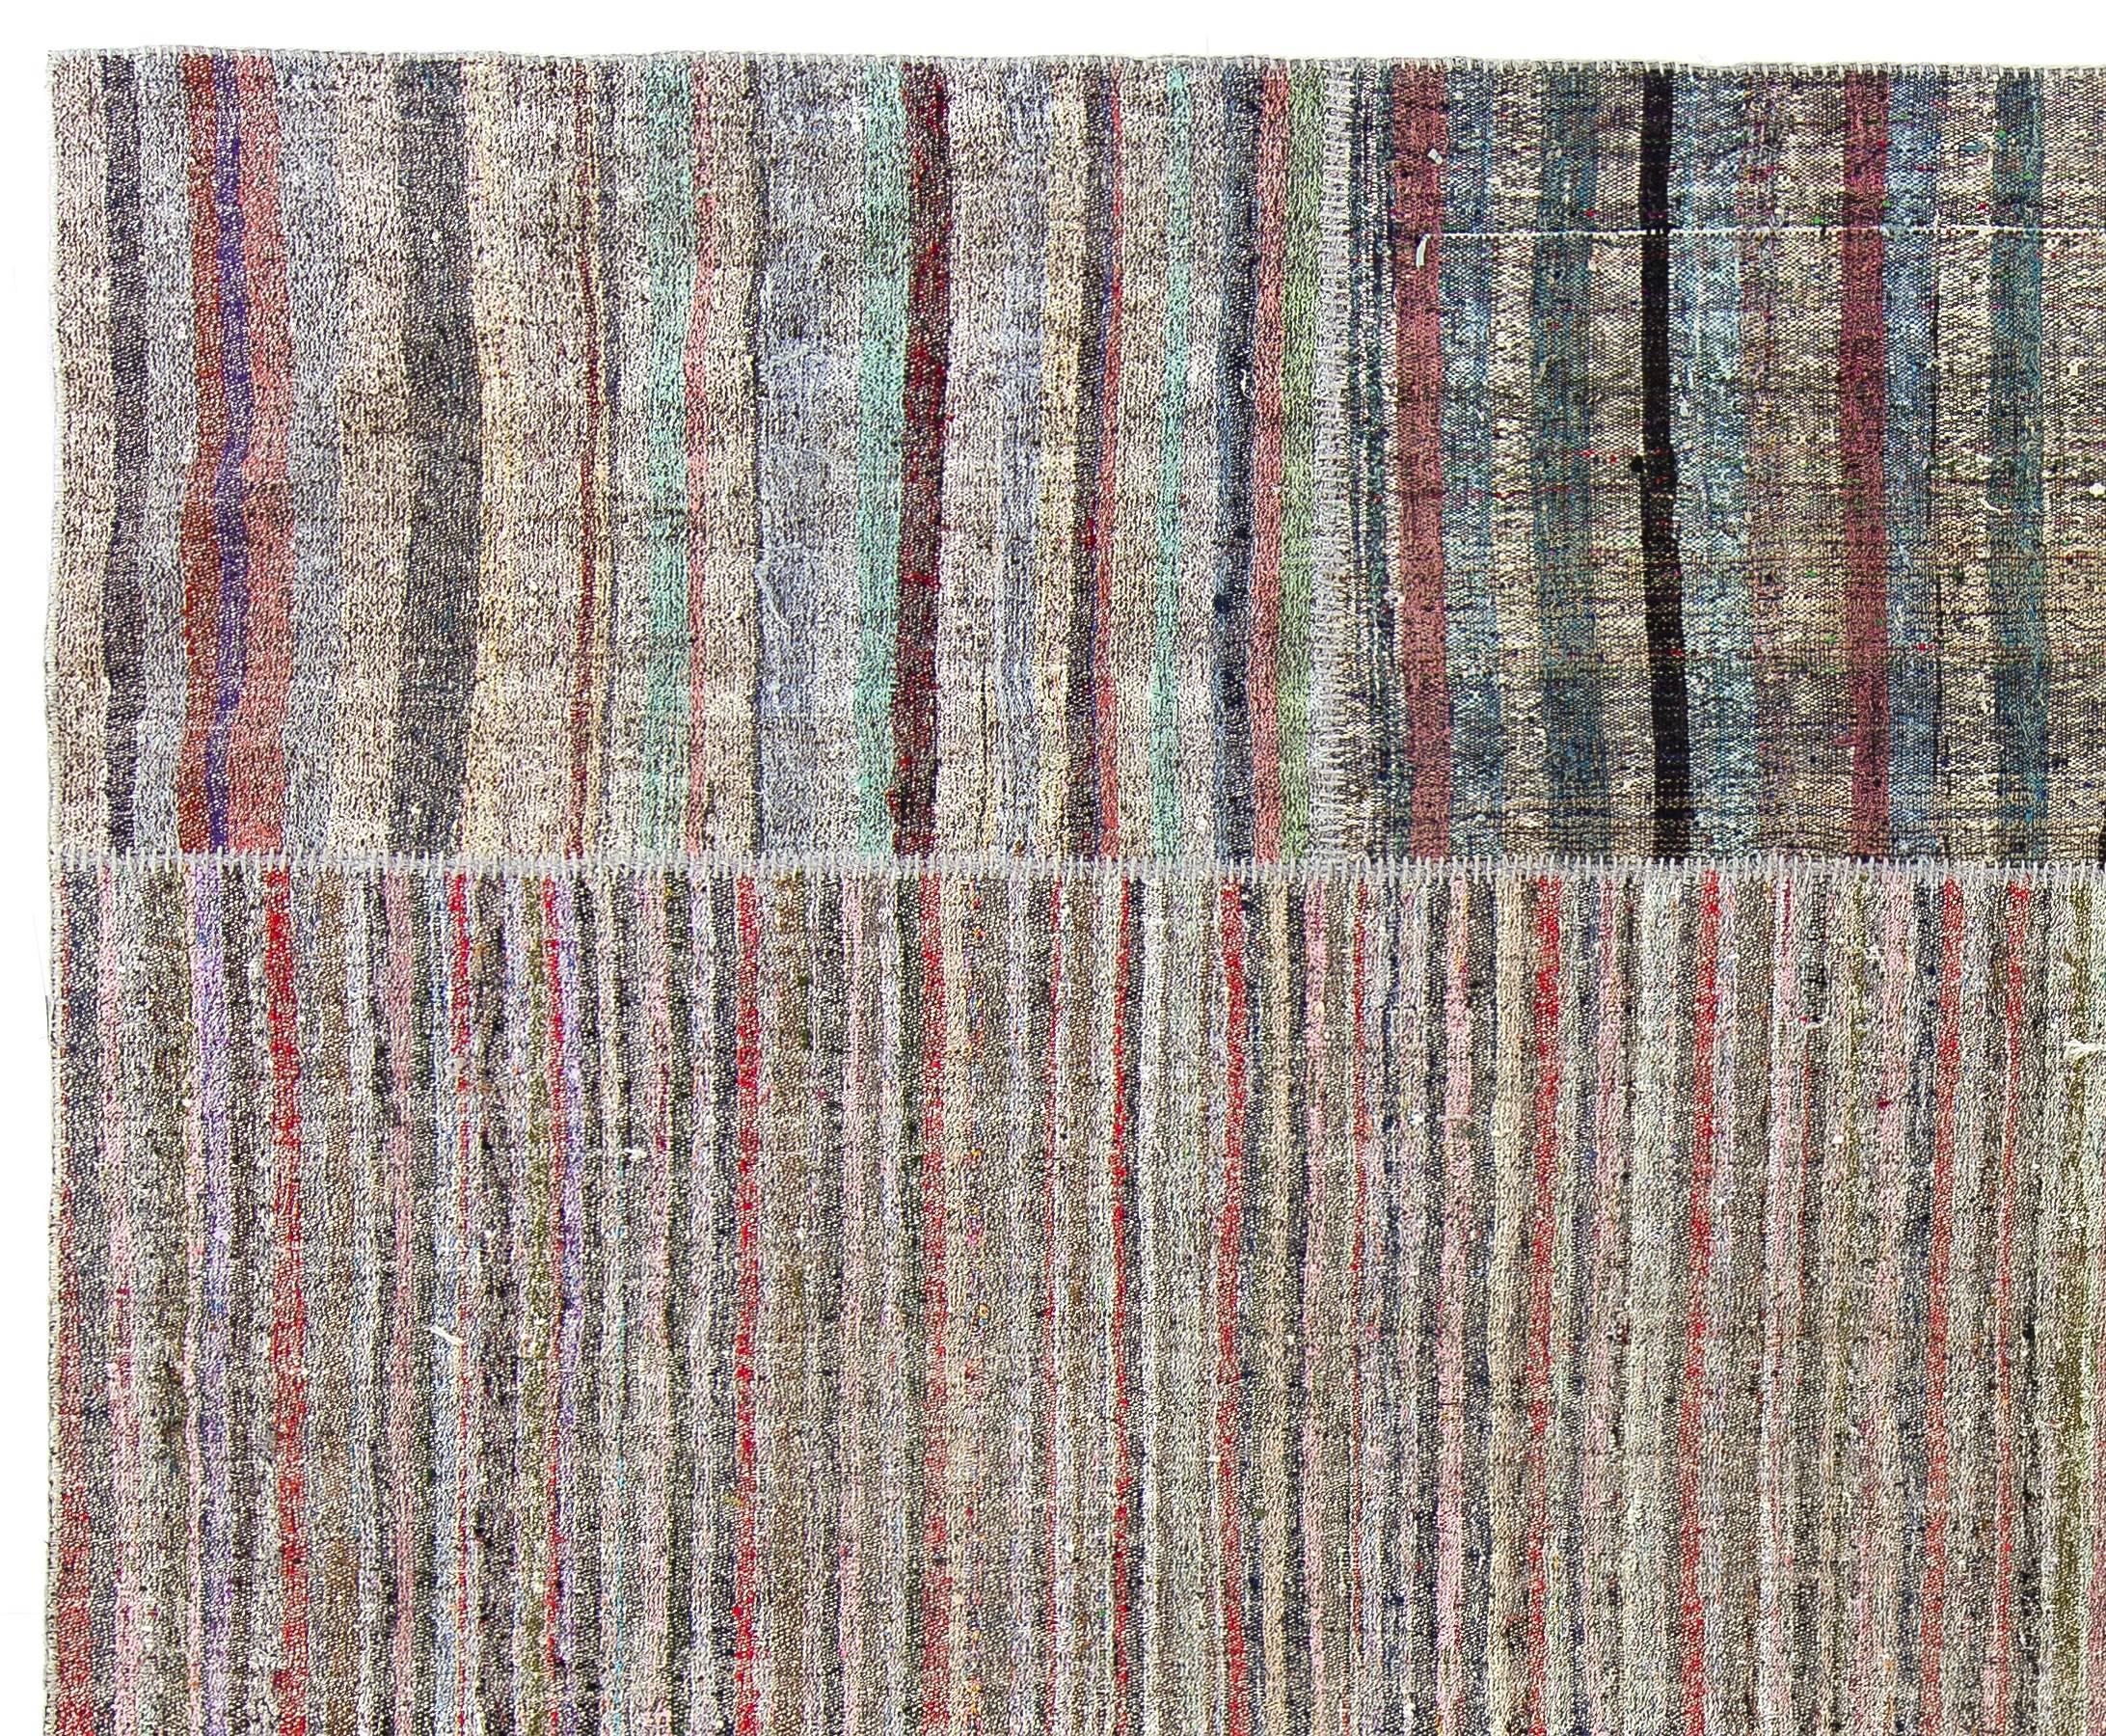 Hand-Woven Cotton and Goat Wool Kilim Rug with Colorful Stripes